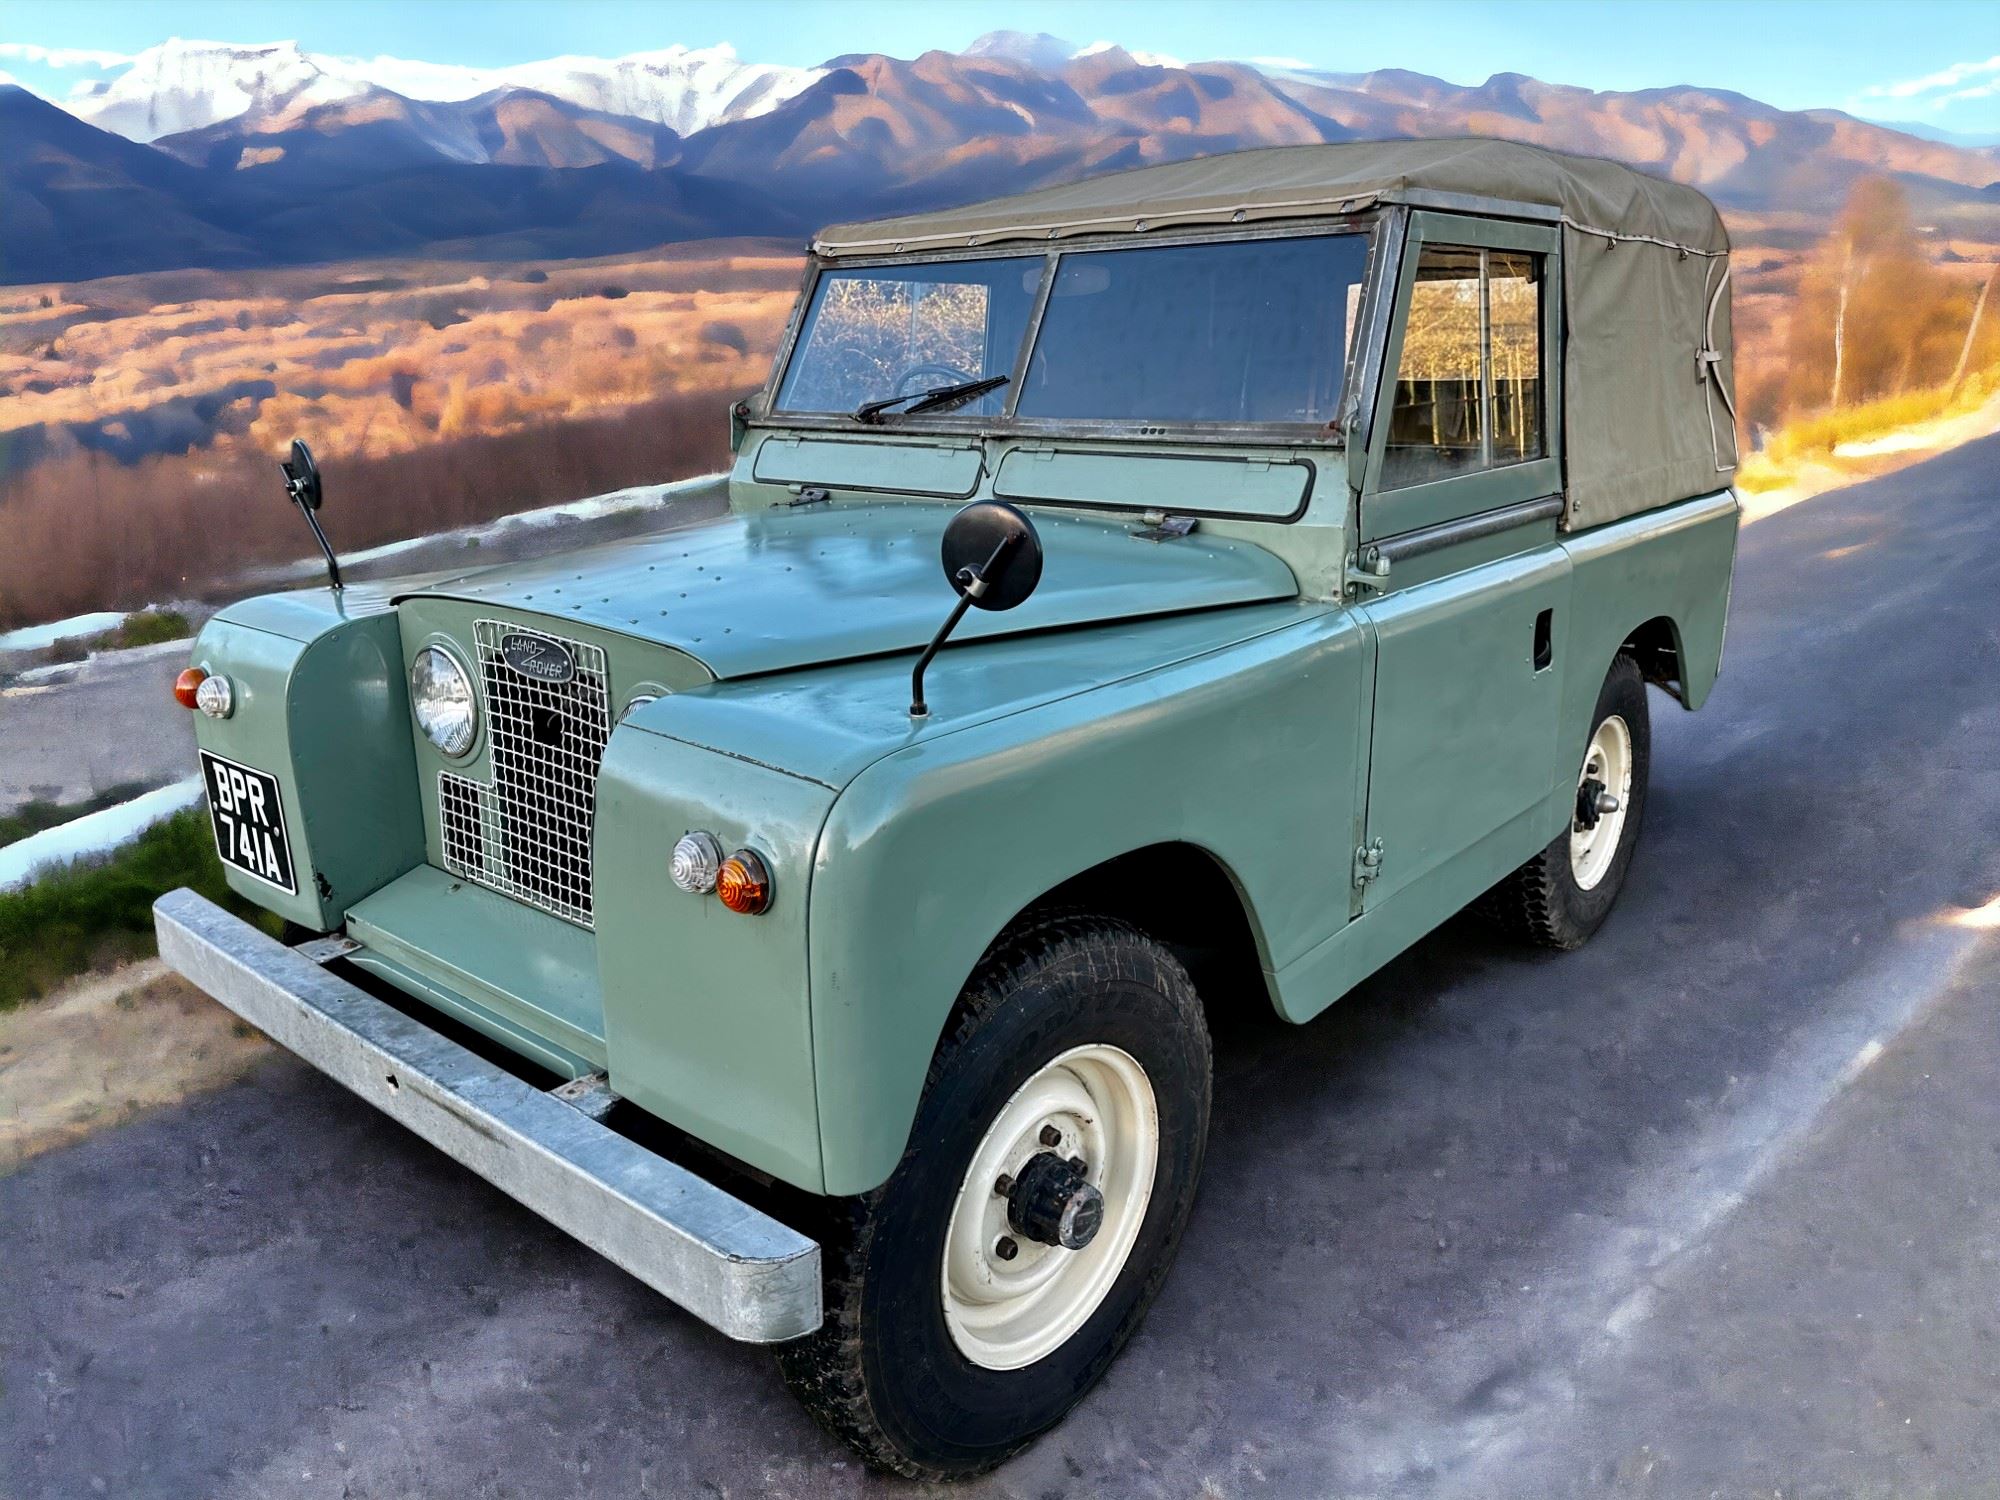 Land rover series iia myqh8ylcrqmoap1 elatm